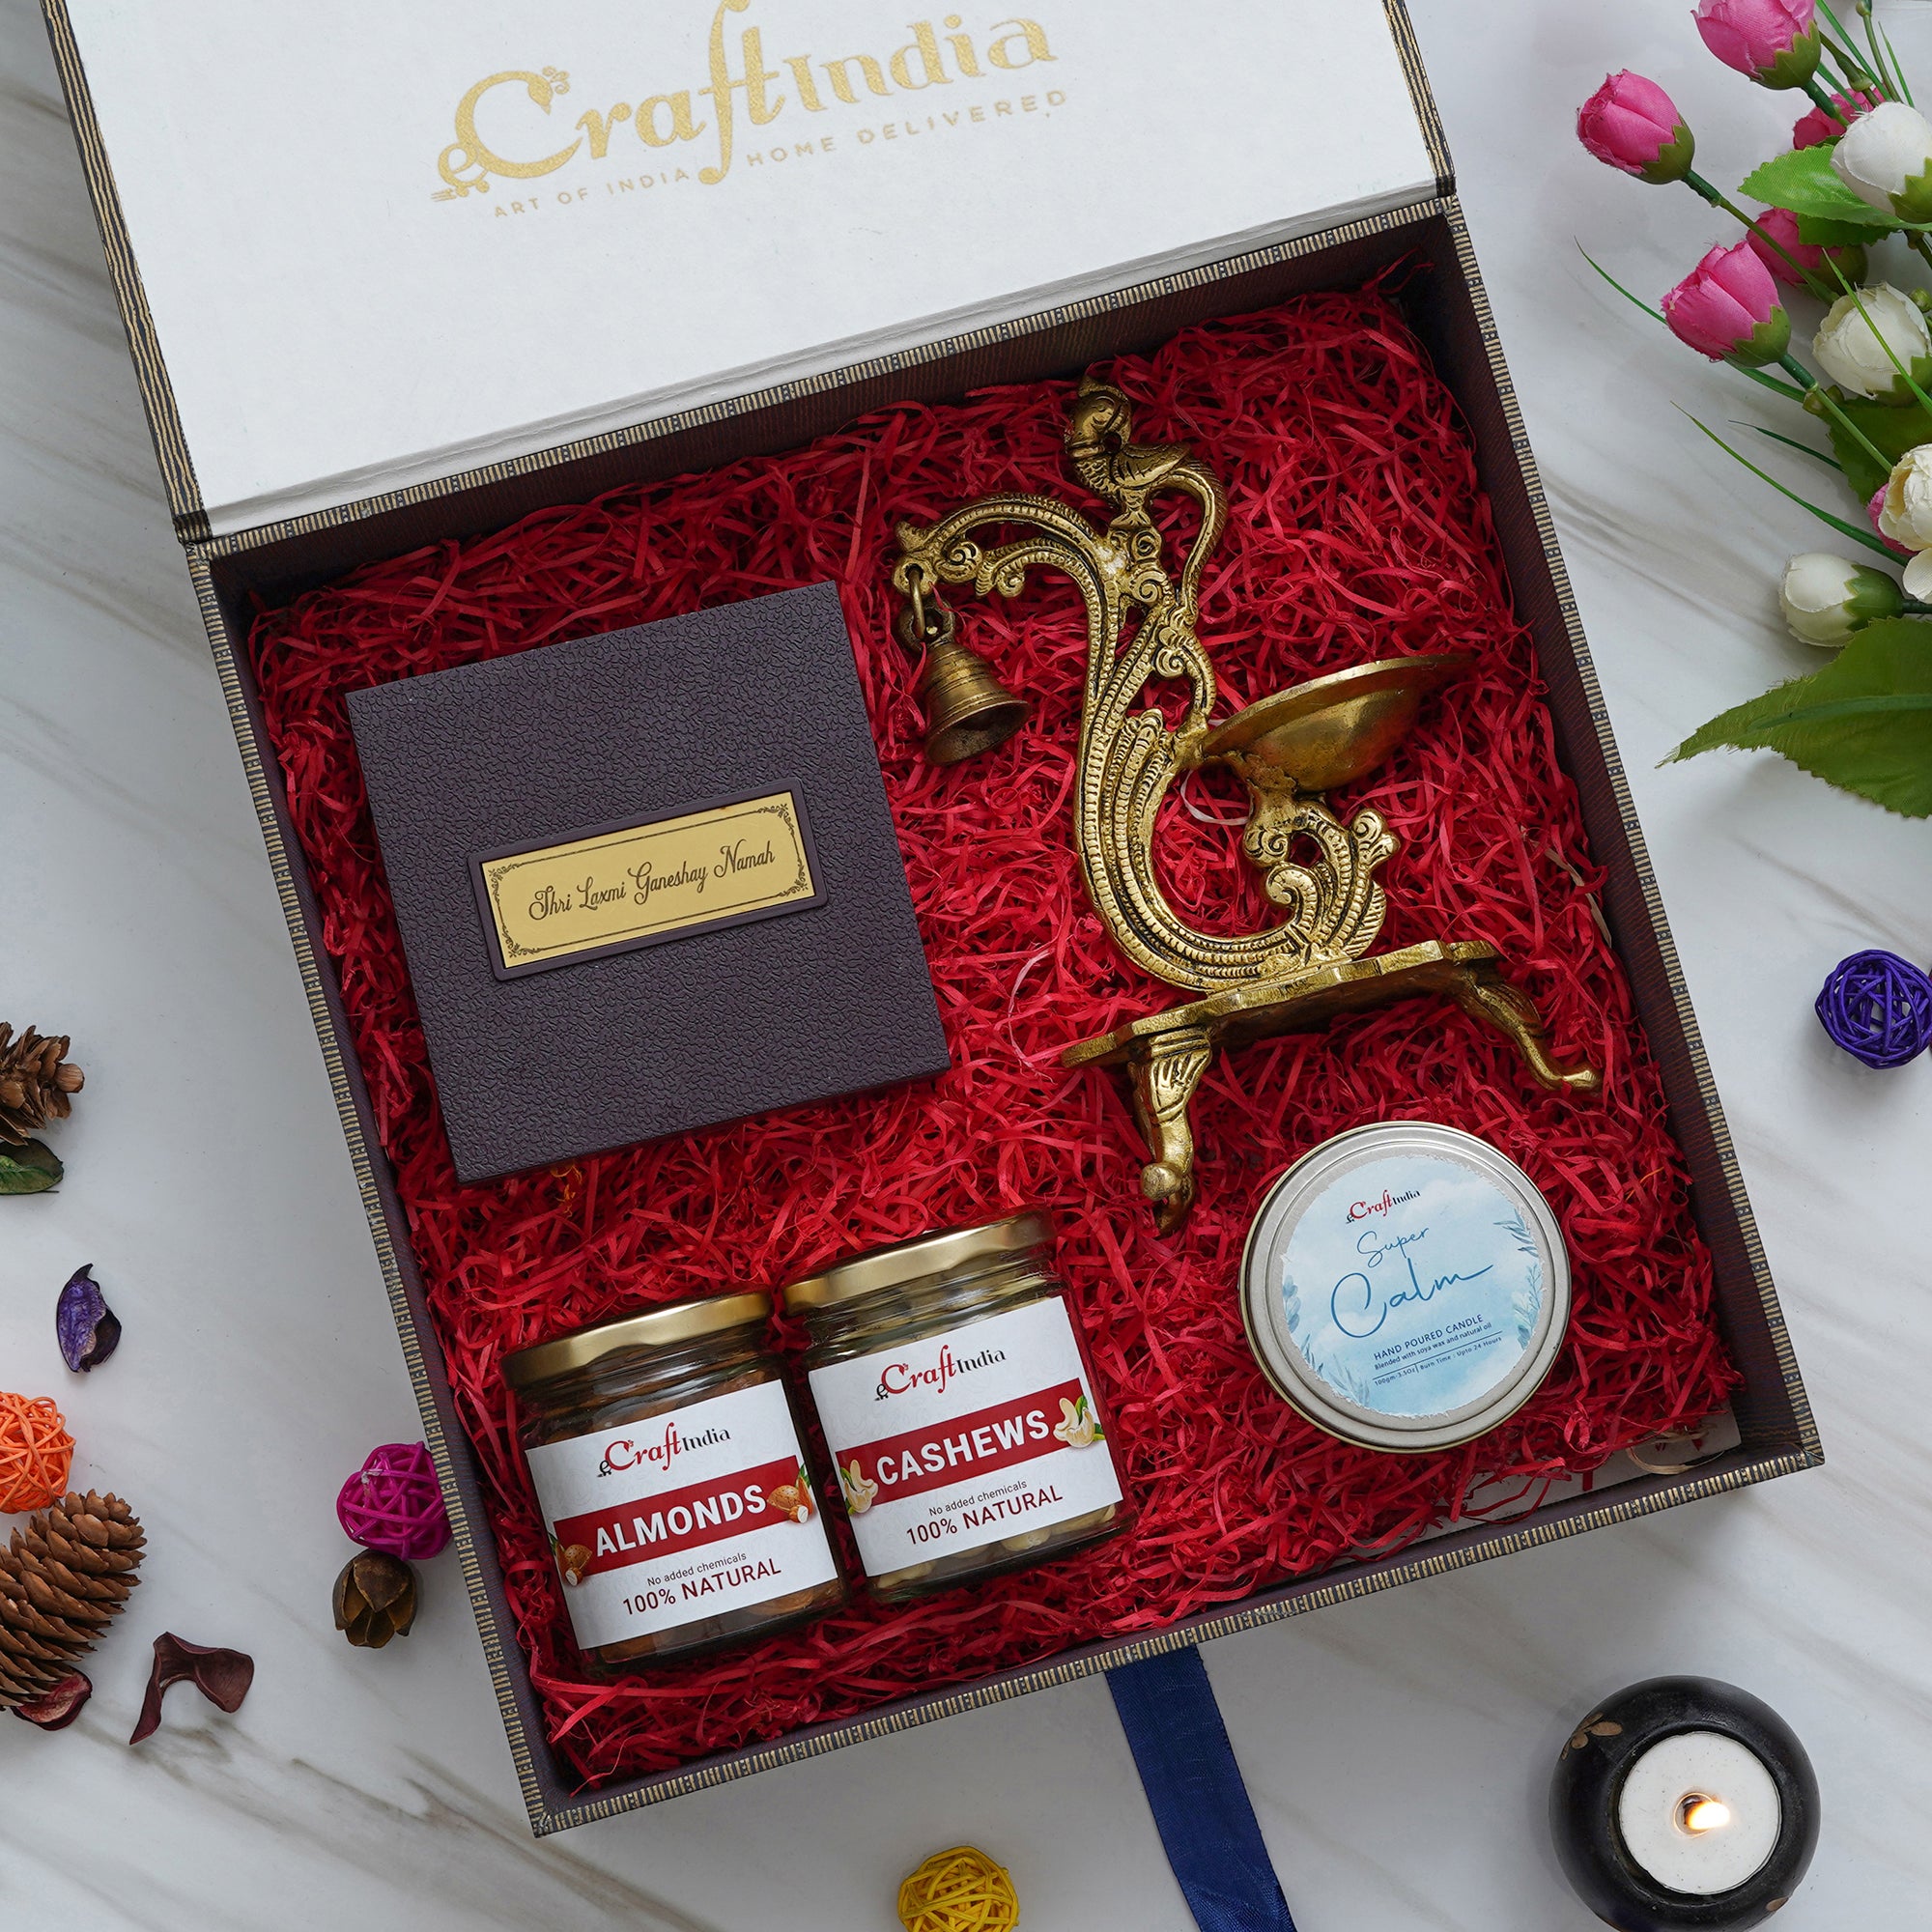 eCraftIndia Exquisite Hamper - Brass Diya with Bells and Stand, Gold Plated Lakshmi Ganesha Photo Frame and Charan Paduka Pooja Box, Super Calm Hand Poured Soya Wax Candle, Almonds, Cashews Dry Fruits Jars